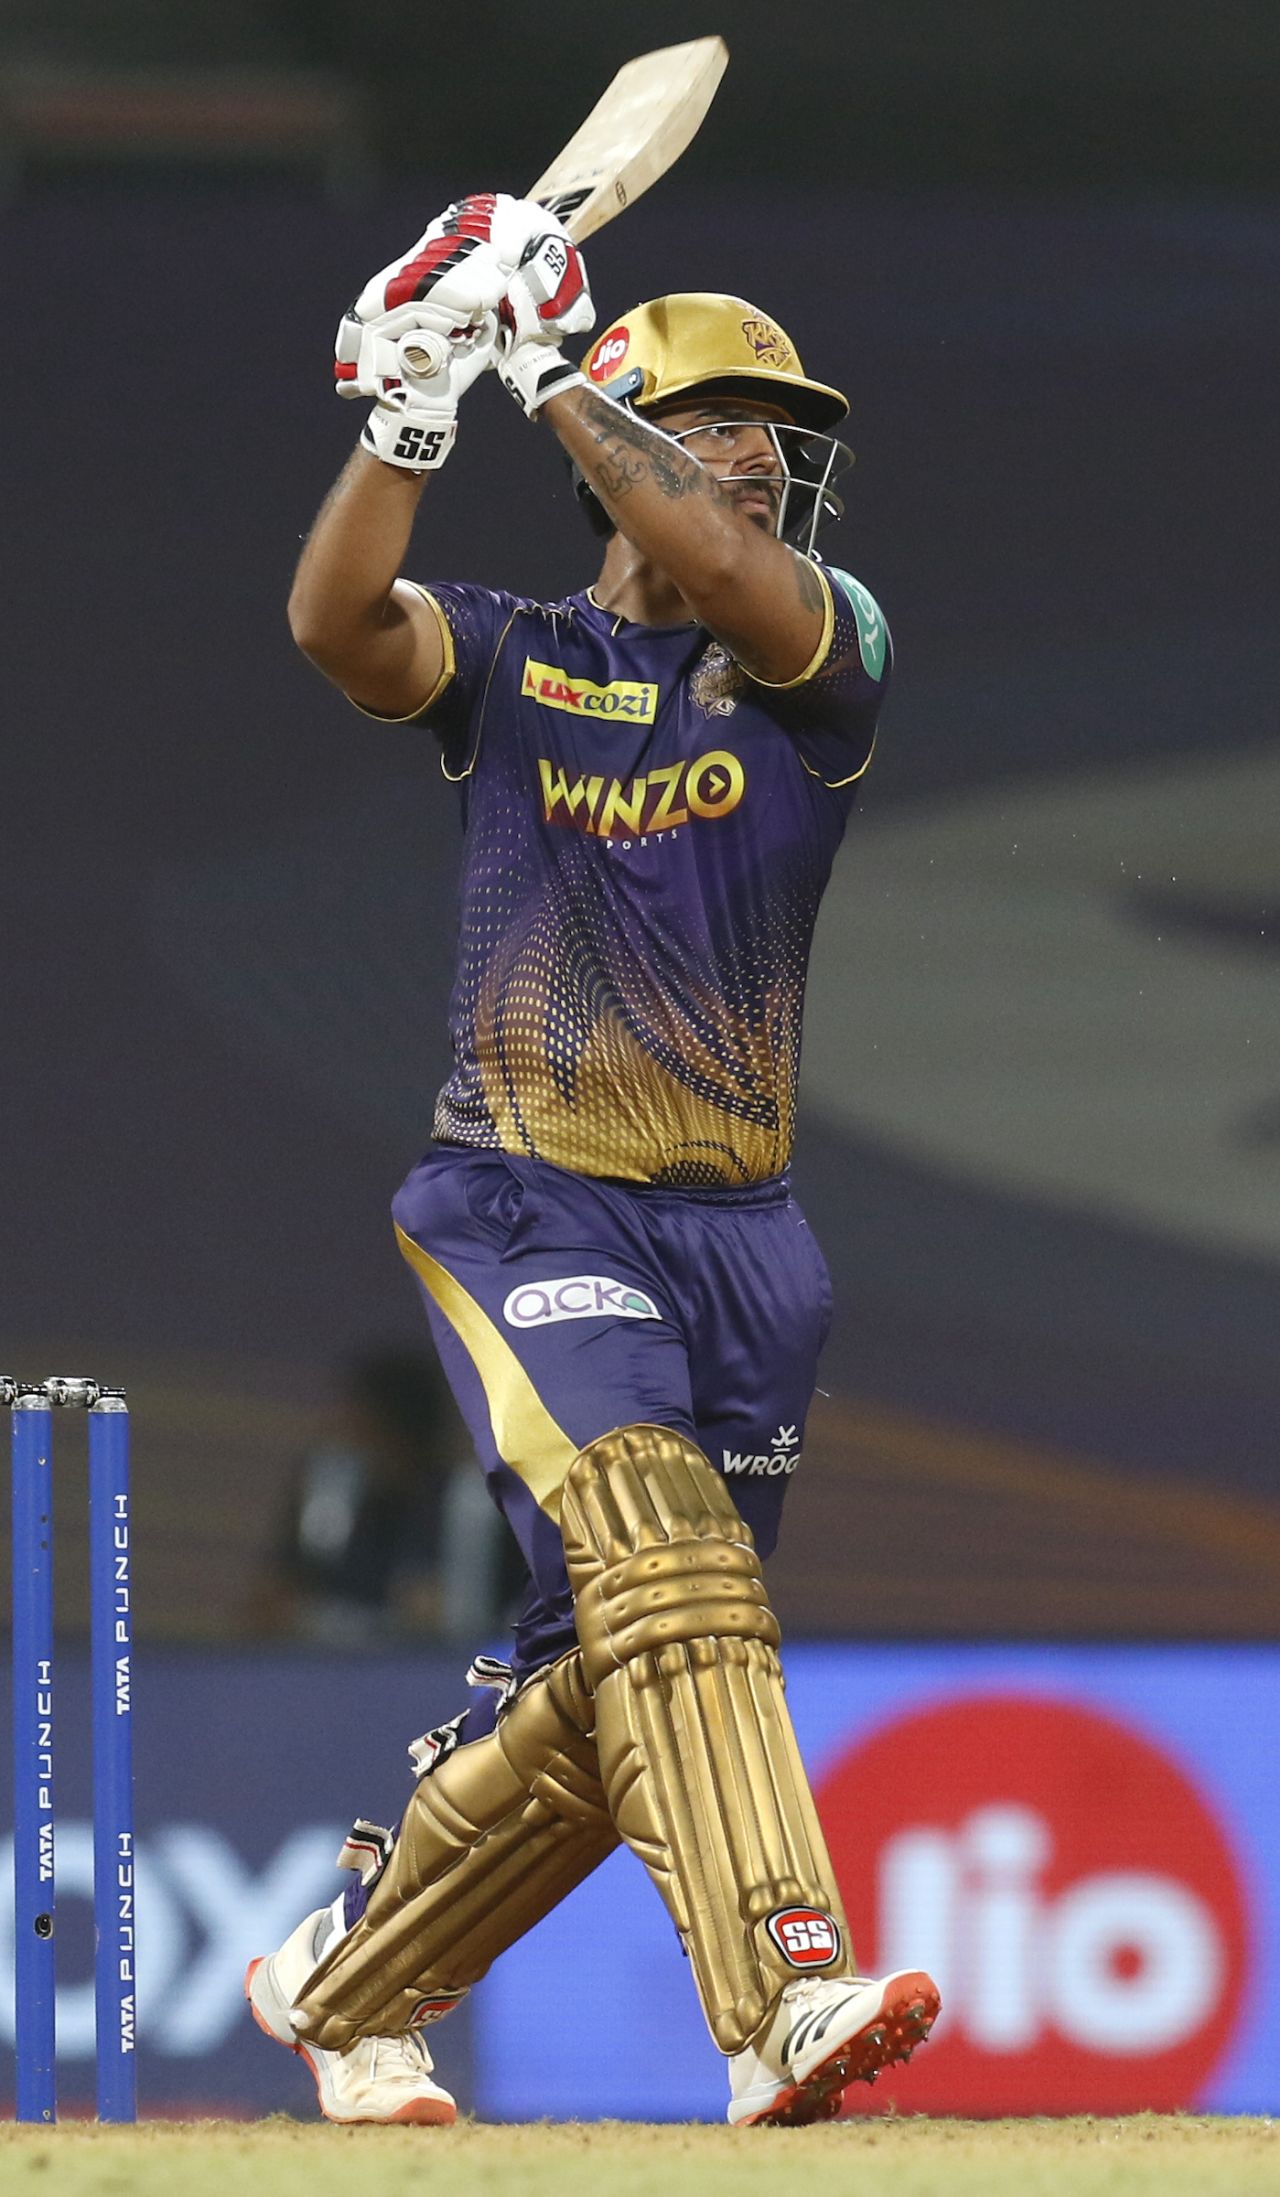 Nitish Rana gave the Knight Riders innings impetus after the loss of the openers, Kolkata Knight Riders vs Lucknow Super Giants, IPL 2022, DY Patil Stadium, Mumbai, May 18, 2022